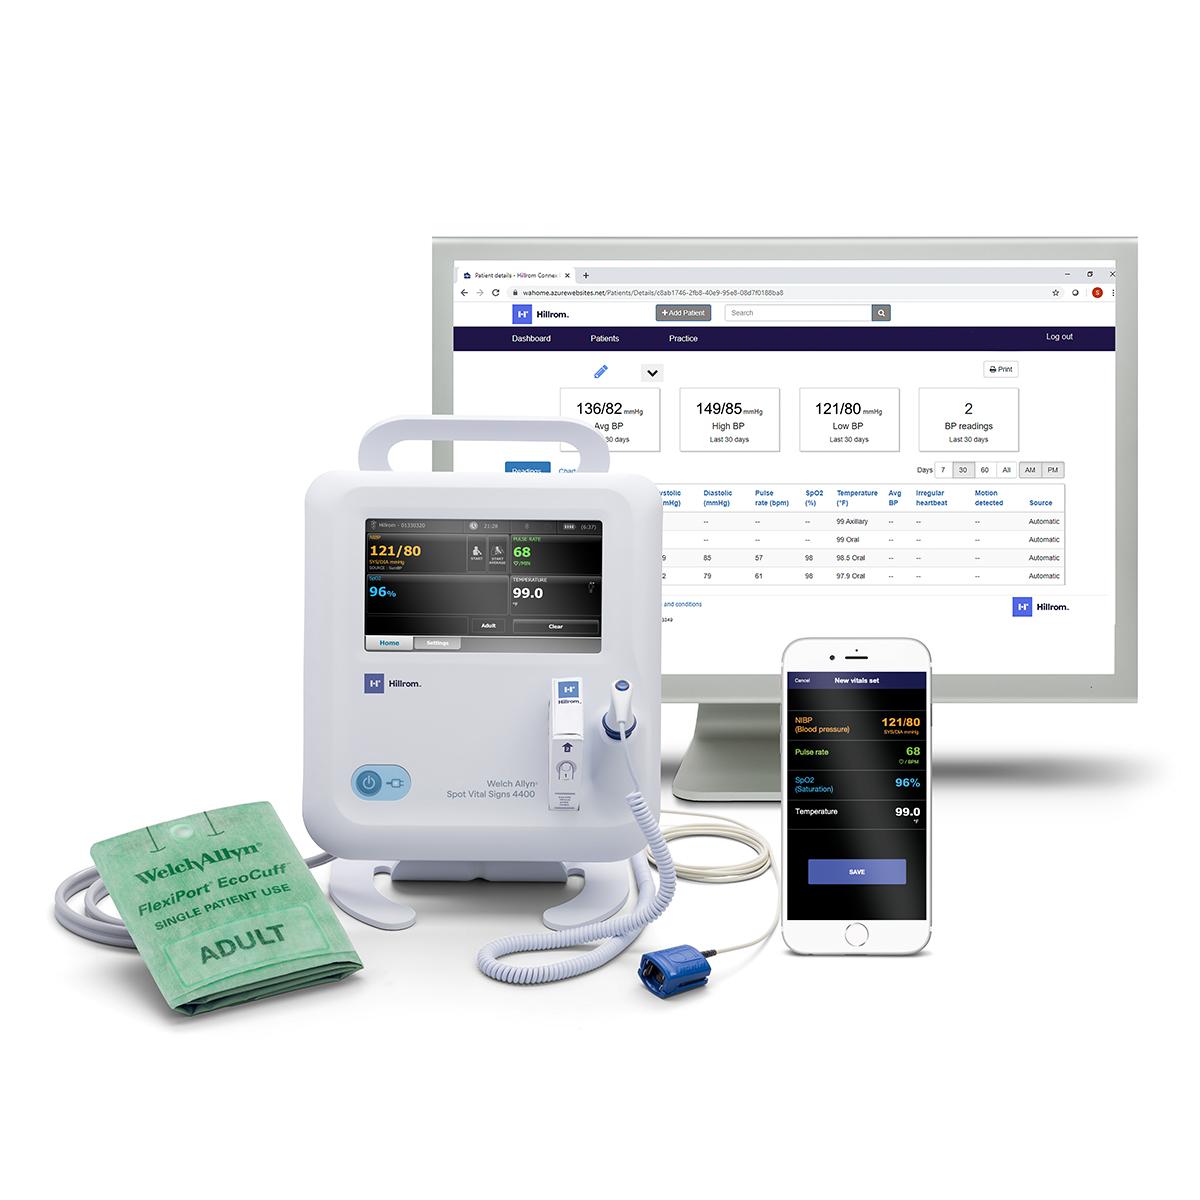 Remote patient monitoring with the Hillrom™ Extended Care Solution, including the Welch Allyn® Spot Vital Signs® 4400 Device, Hillrom(TM) Connex® App and Hillrom Connex Clinical Portal.